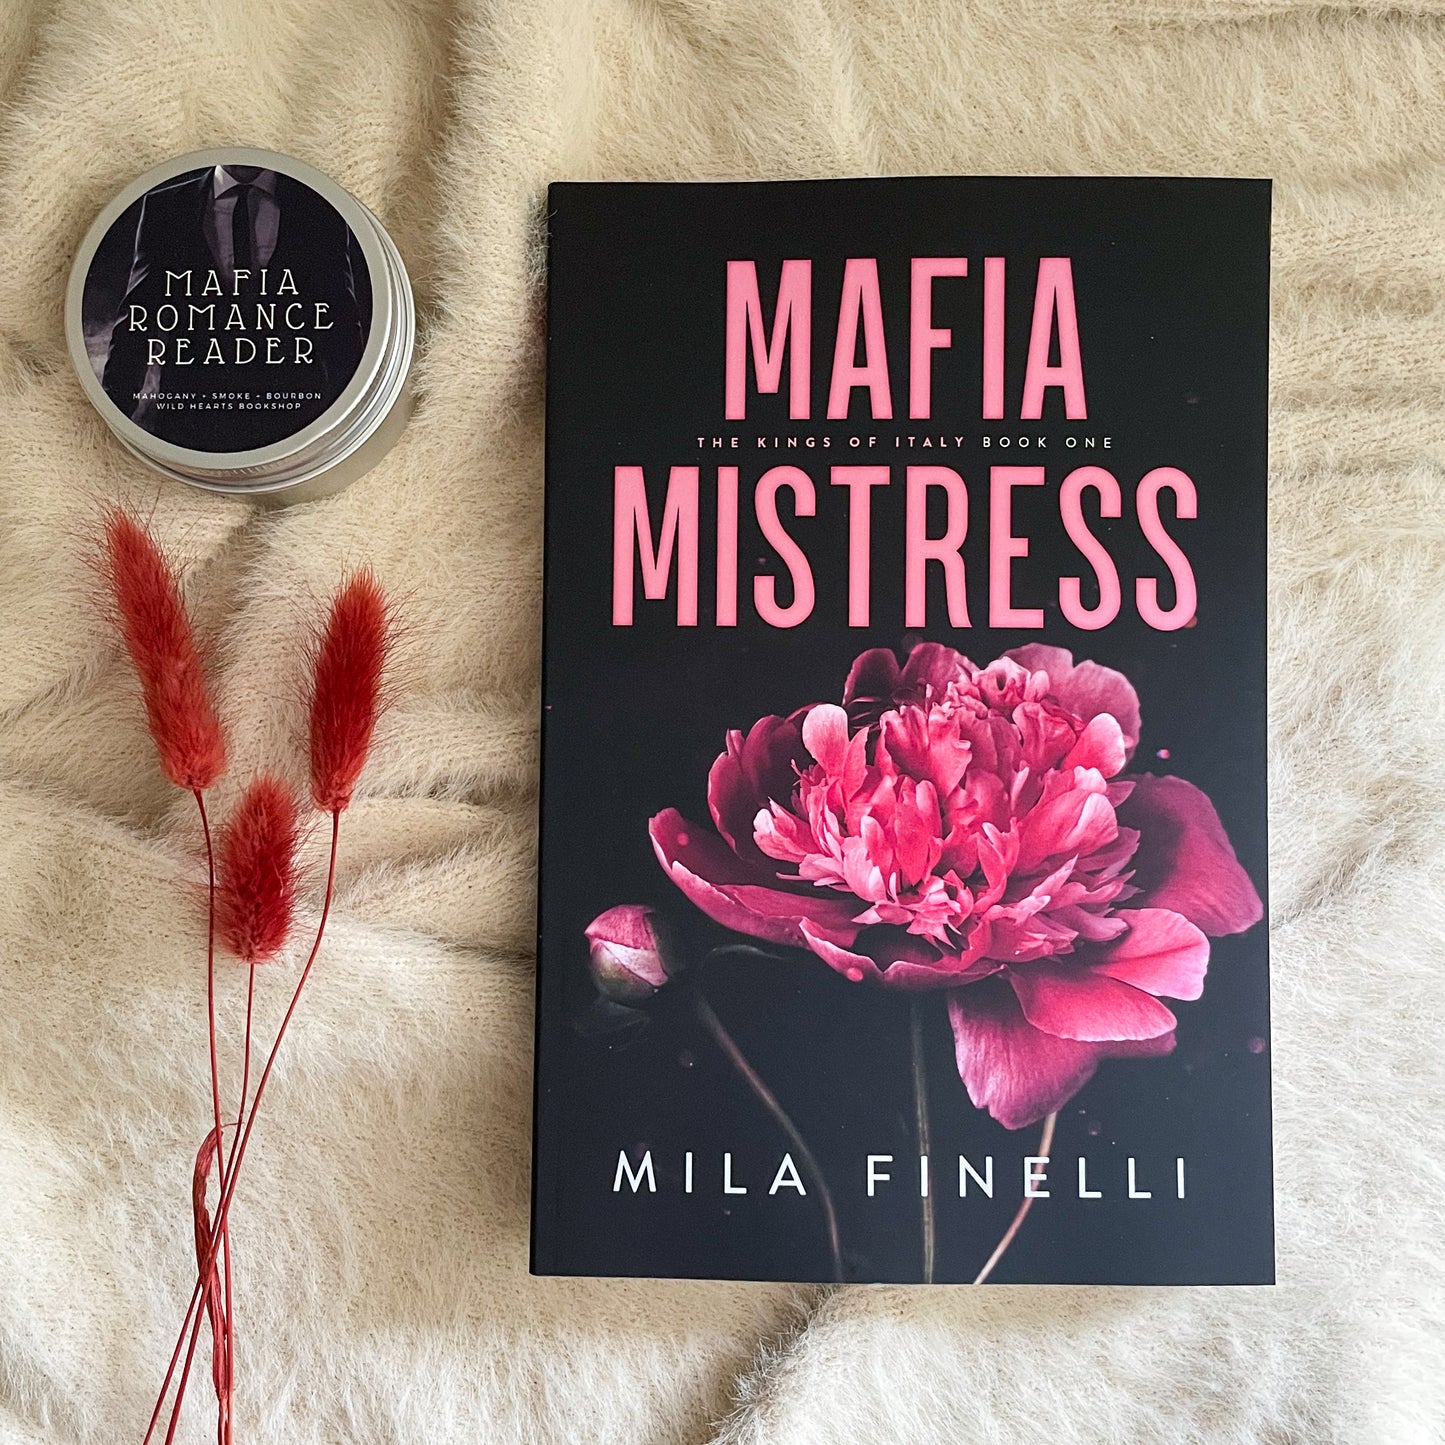 Kings of Italy series by Mila Finelli